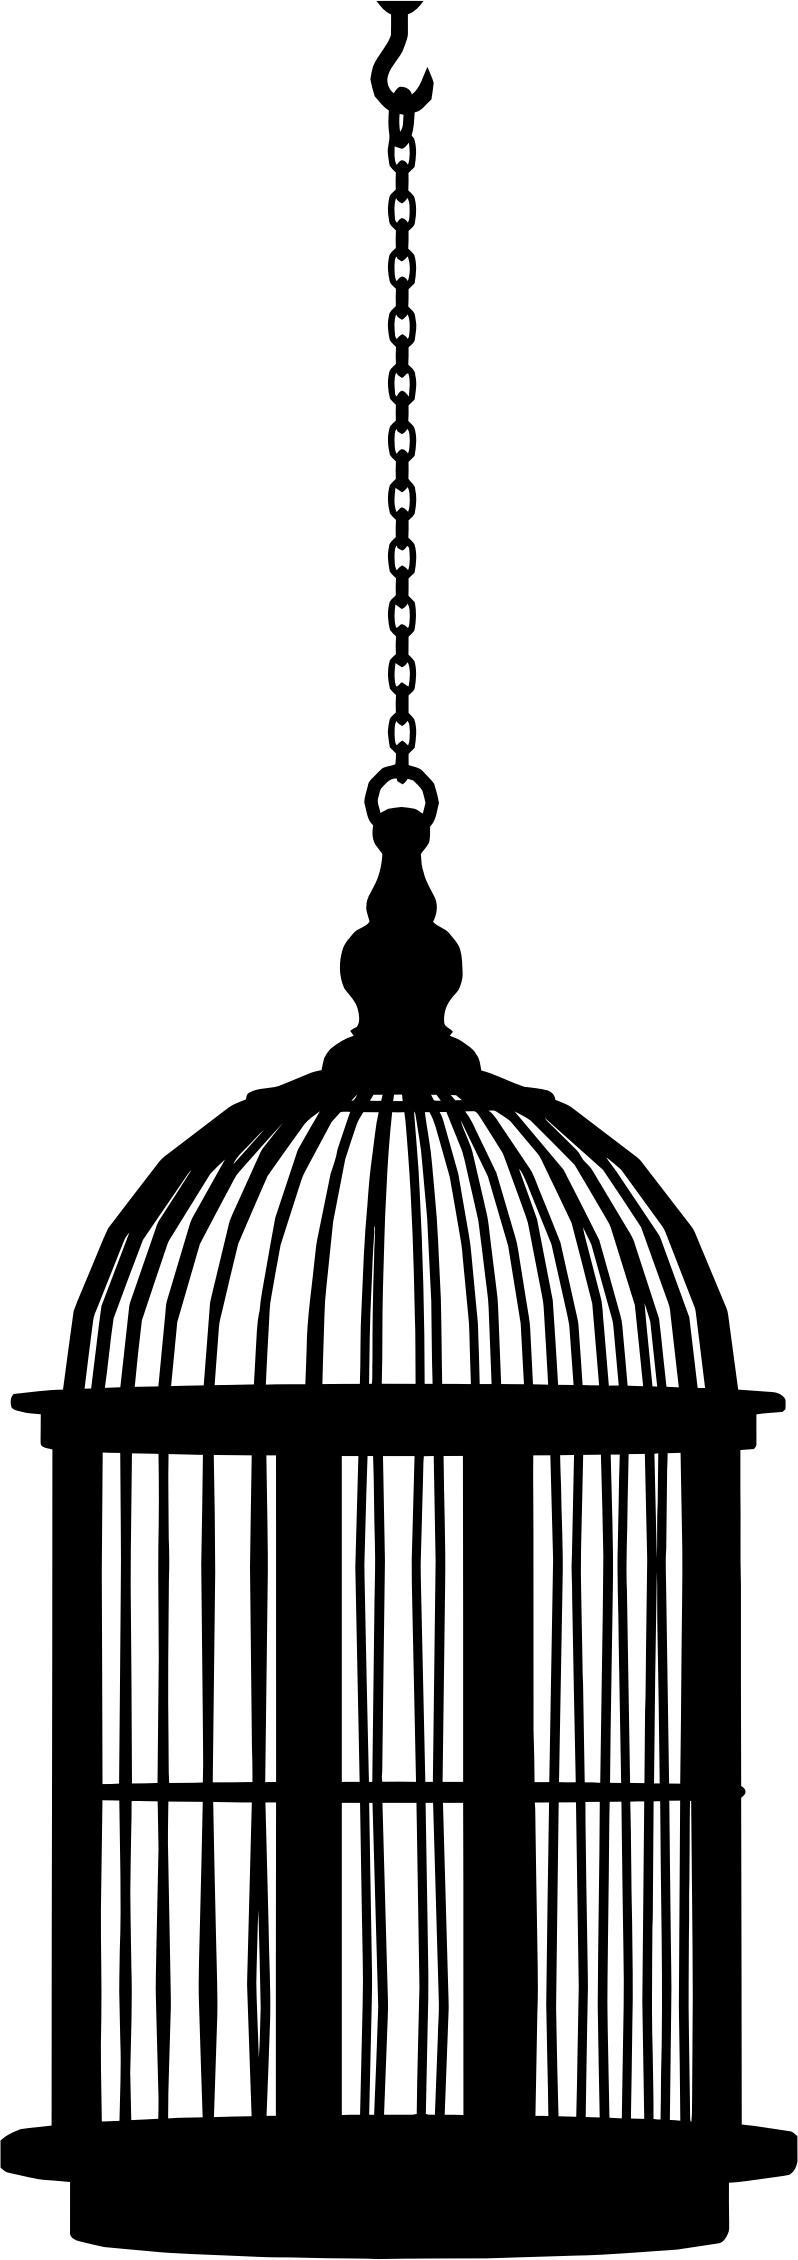 Hanging Bird Cage Silhouette png transparent